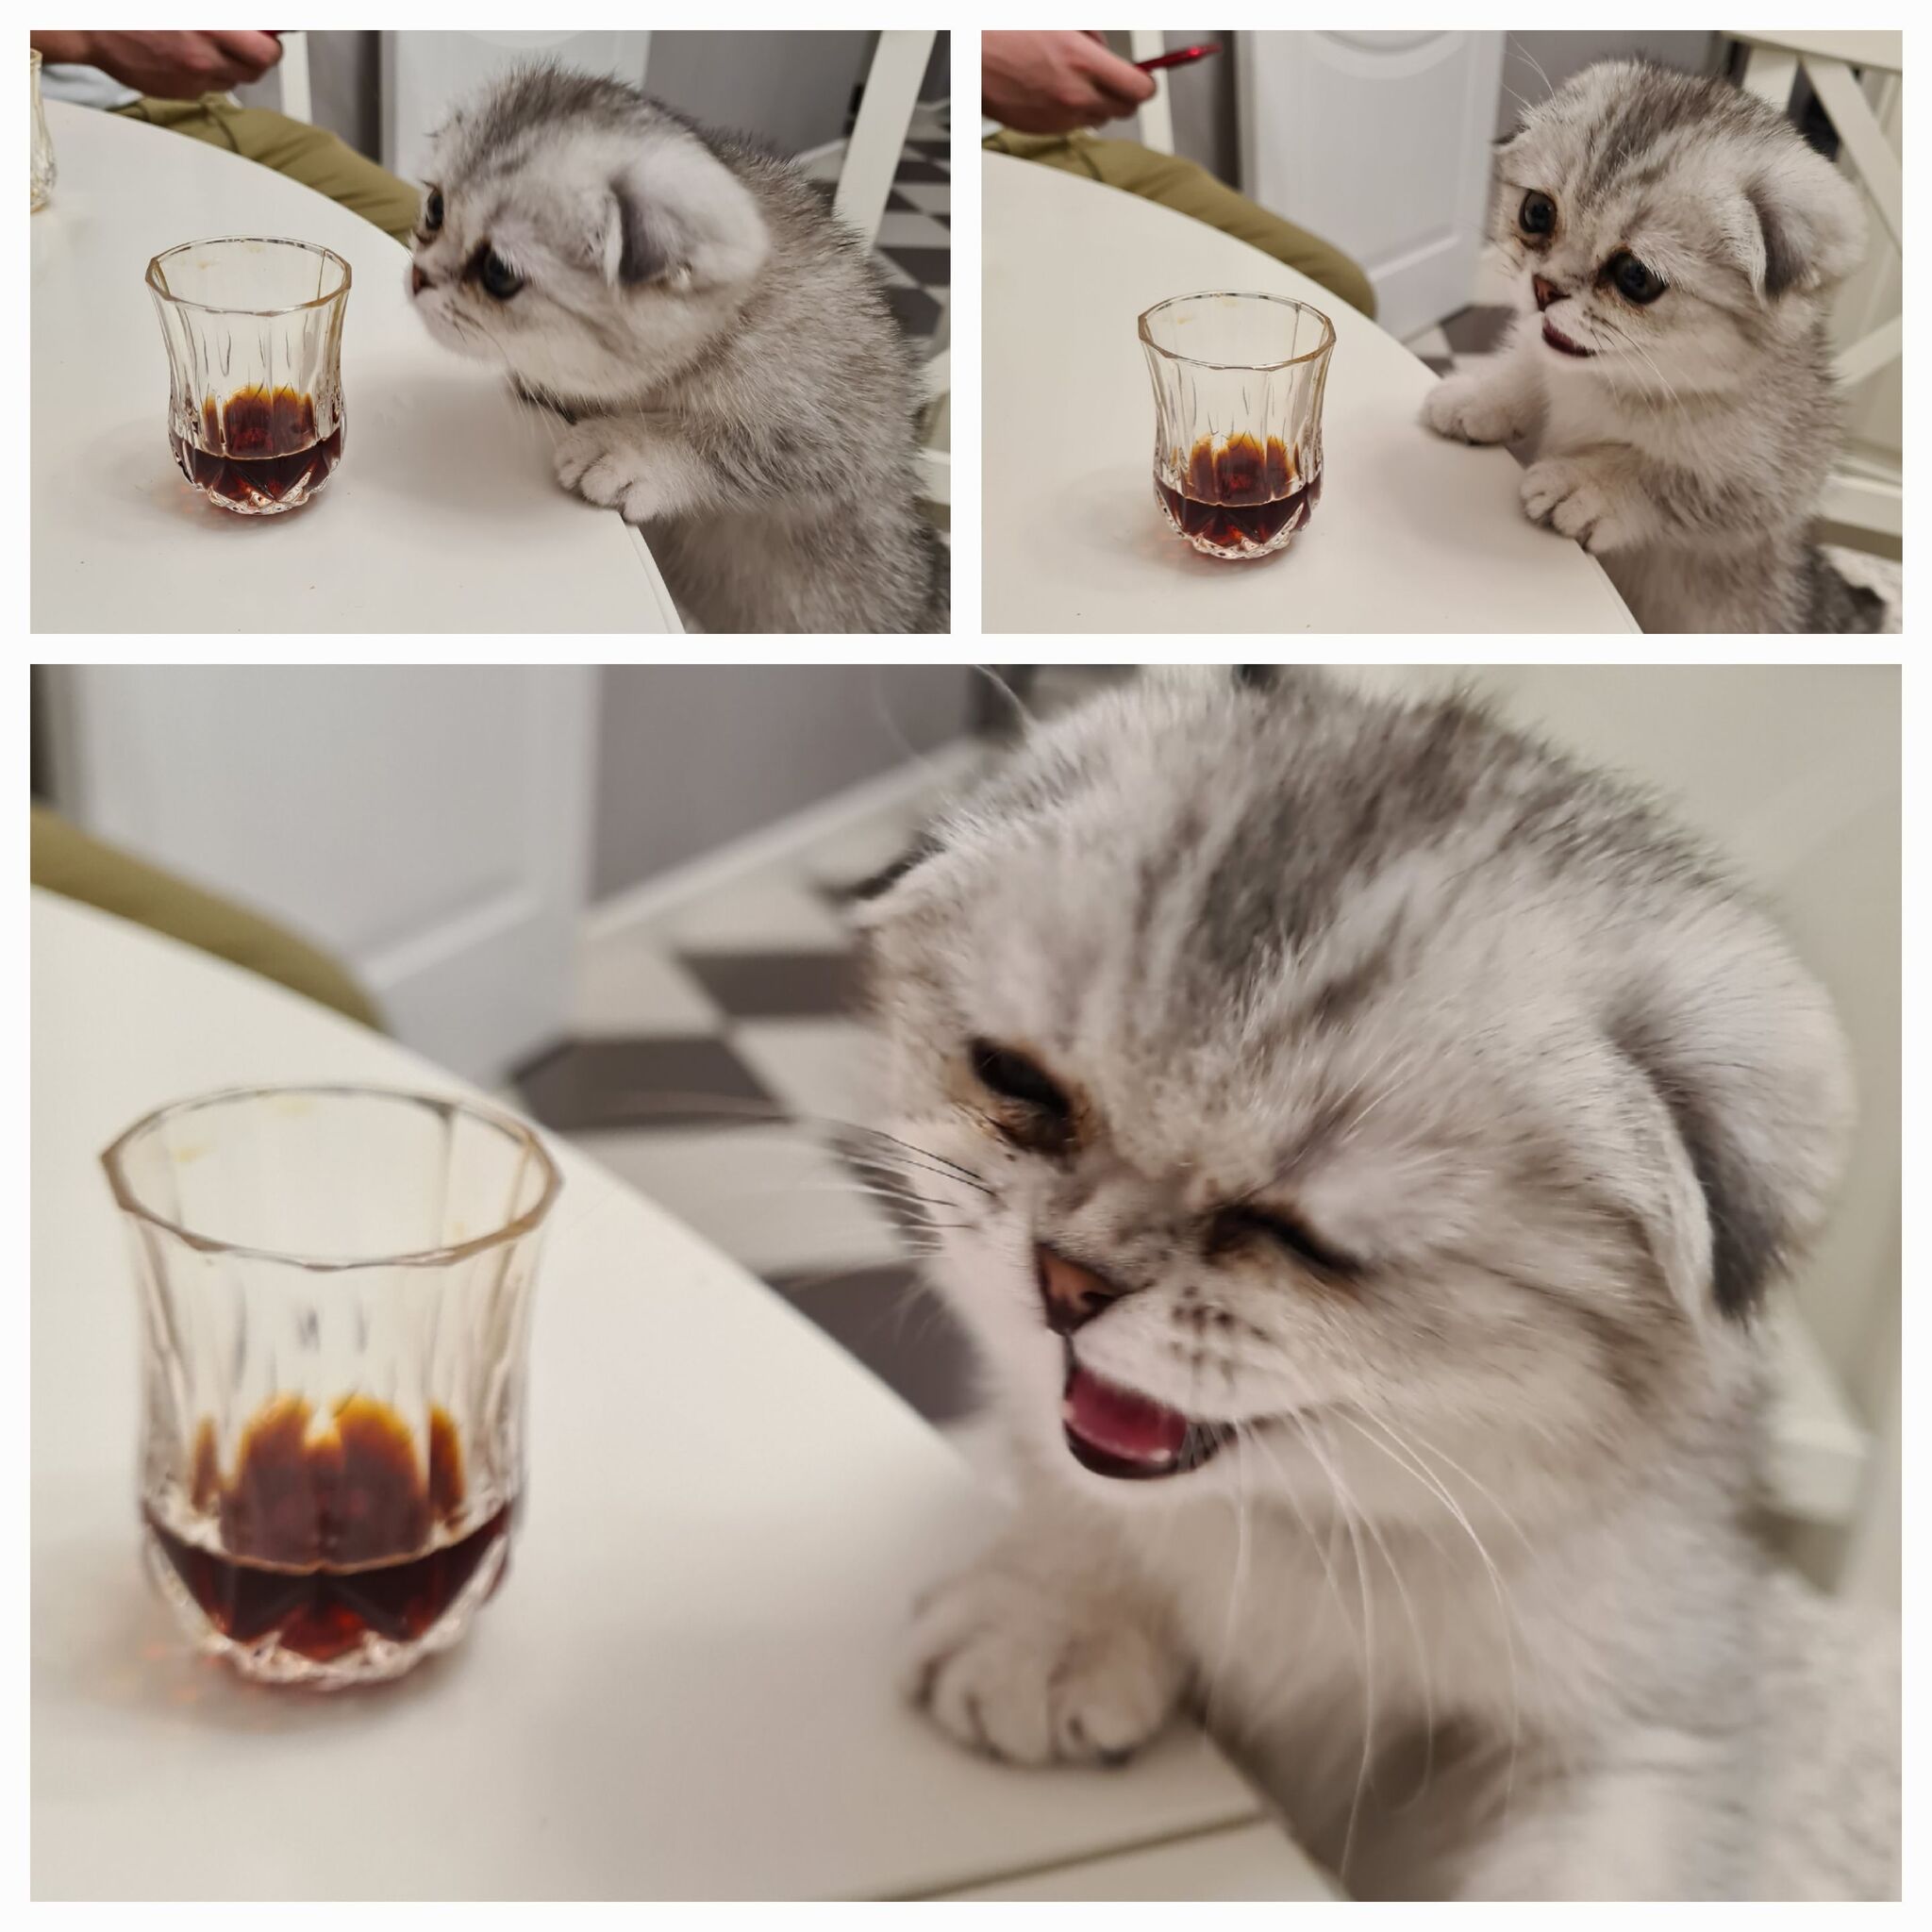 Drinking cat - grief in the family - My, cat, The photo, Collage